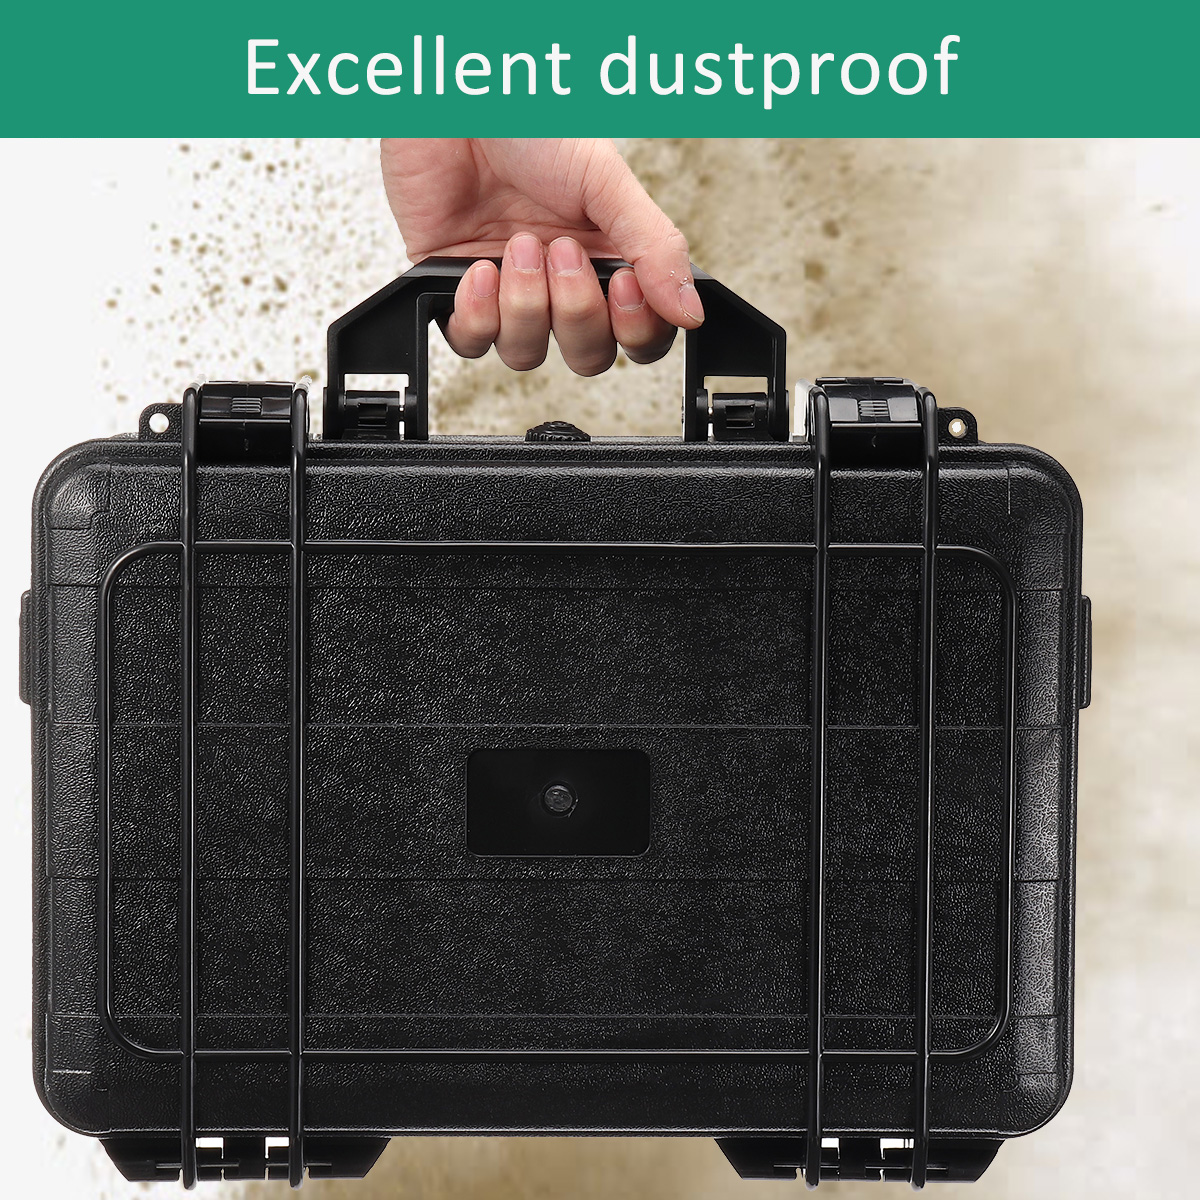 4-Sizes-ABS-Plastic-Sealed-Waterproof-Storage-Case-Foam-Impact--Resistant-Hiking-Portable-Tool-Box-D-1674189-5